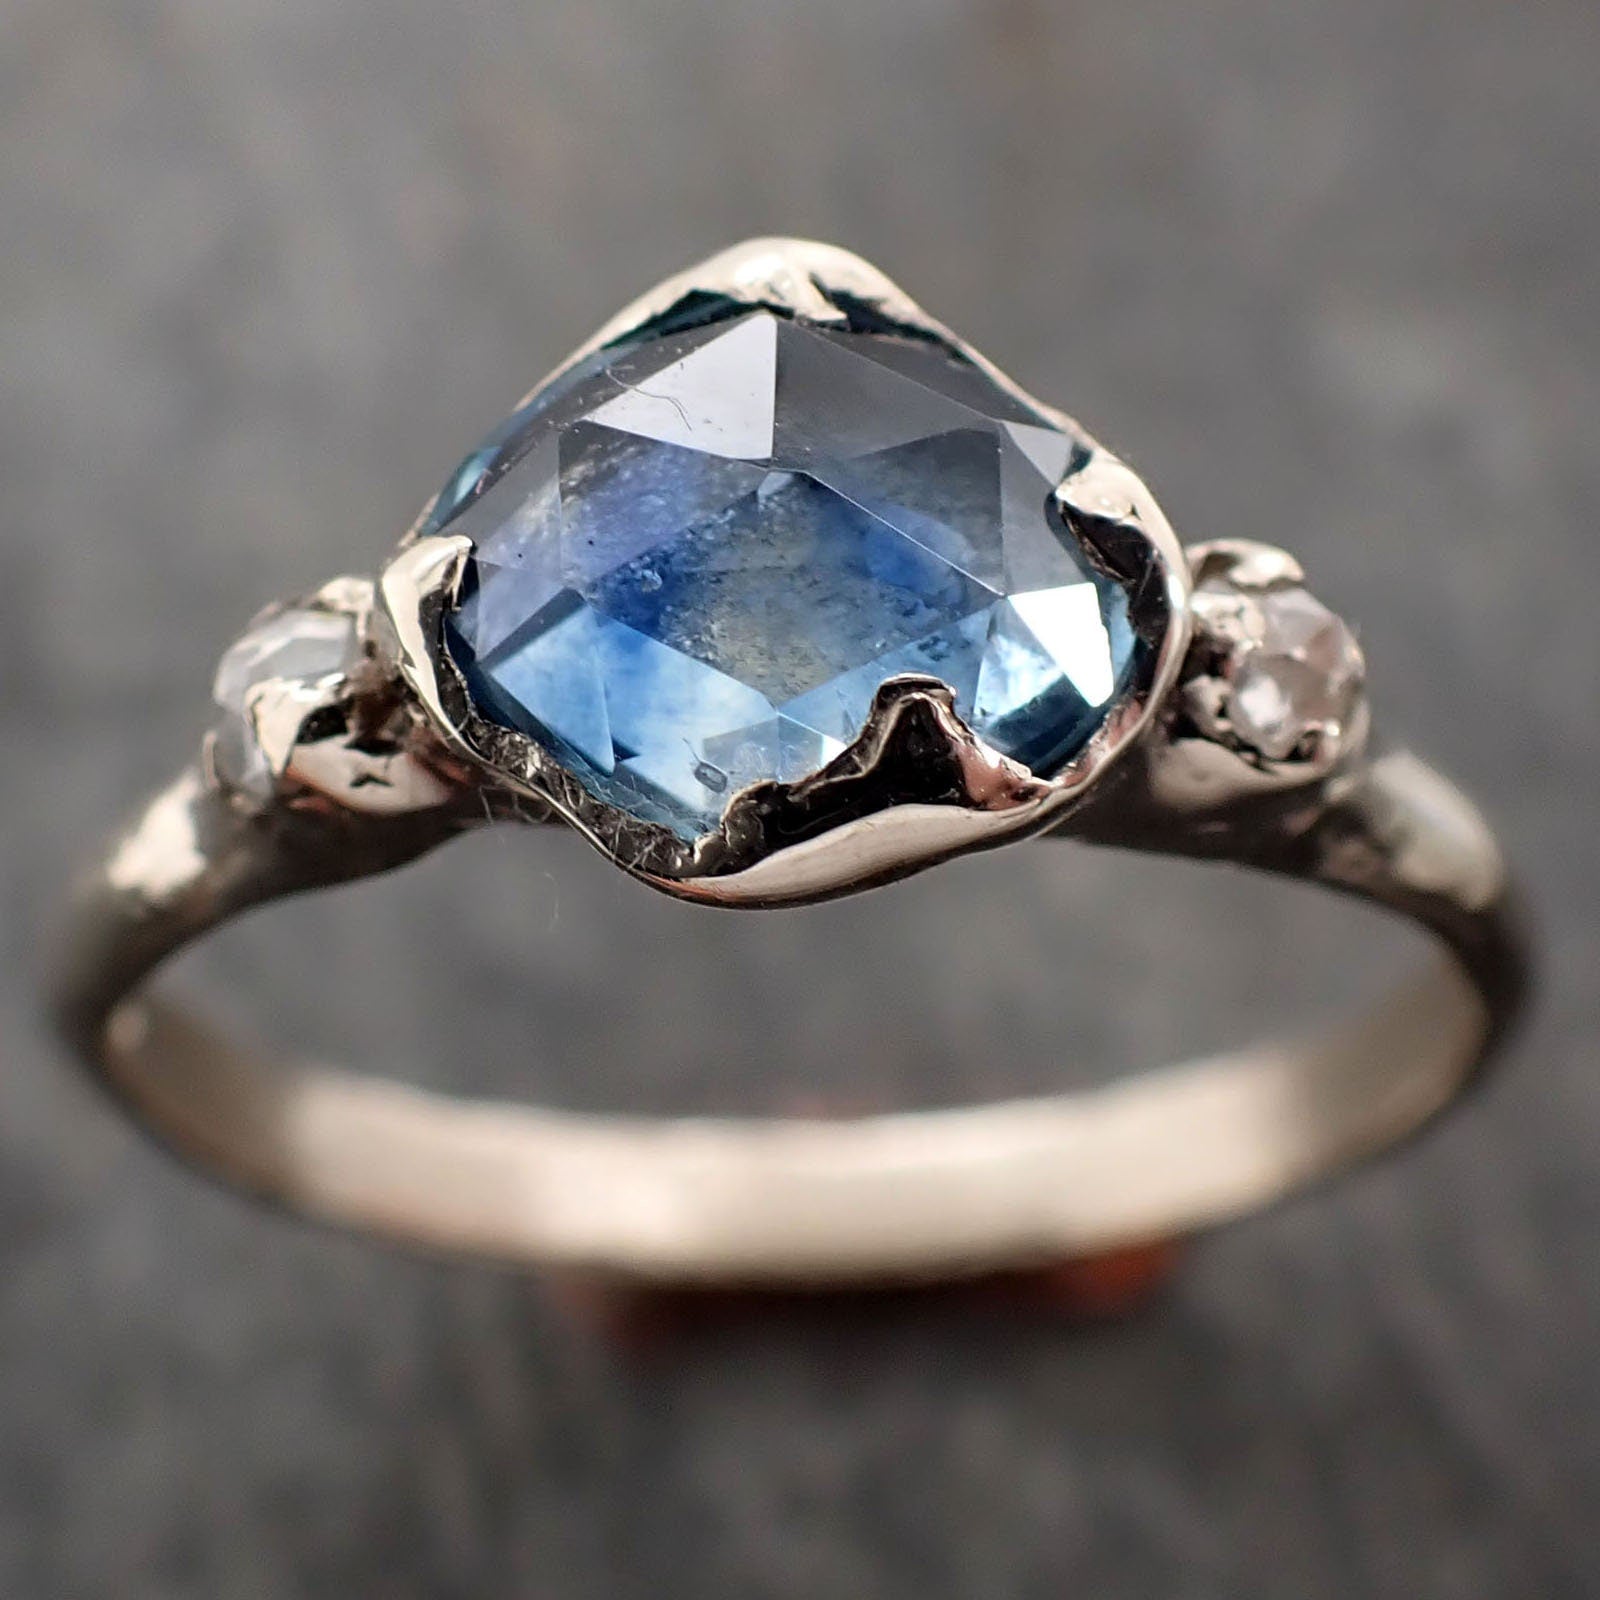 Partially faceted blue Montana Sapphire and fancy Diamonds 18k White Gold Engagement Wedding Ring Gemstone Ring Multi stone Ring 2997